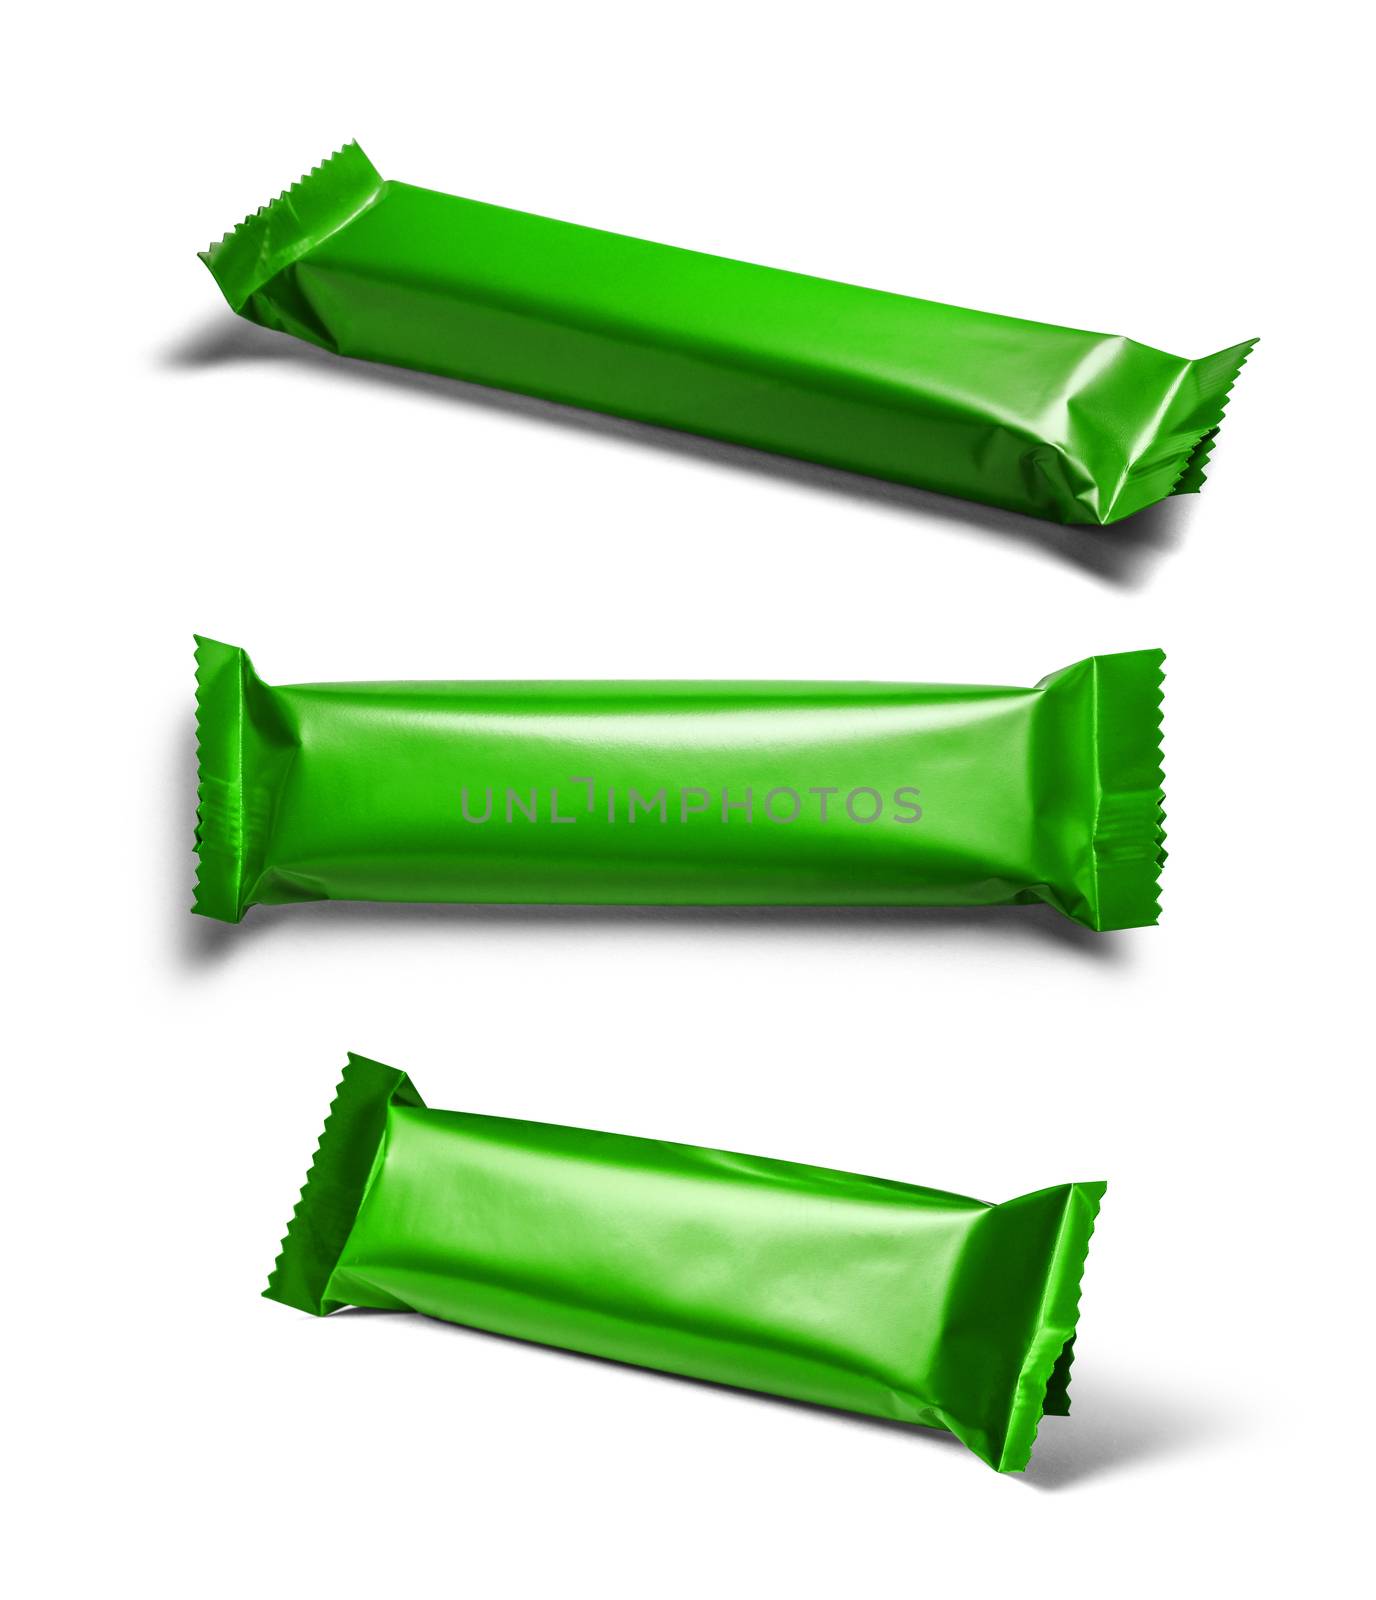 Green packaging template for your design. In different angles on a white background.